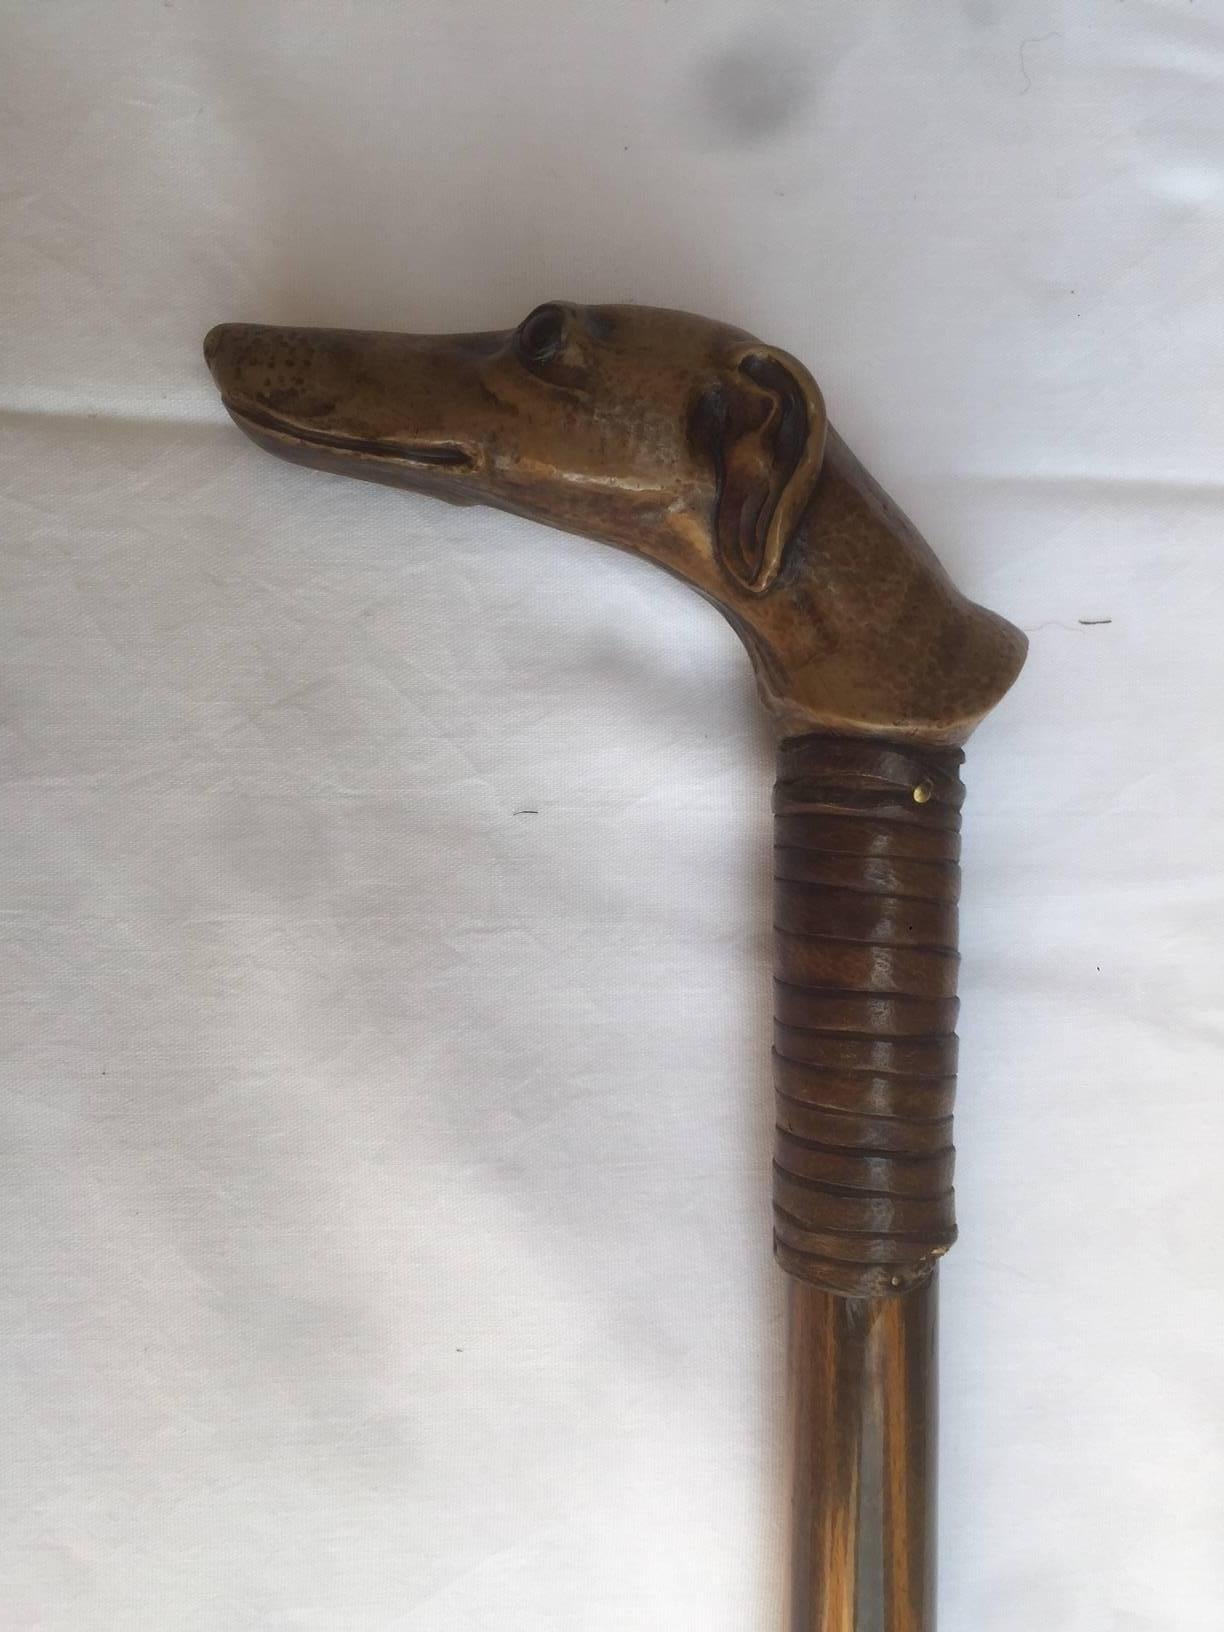 Very nice French Greyhound walking cane.
The top of the cane is a shape of a Head's Greyhound, his eyes are made with glass and the extremity is gilded brass.